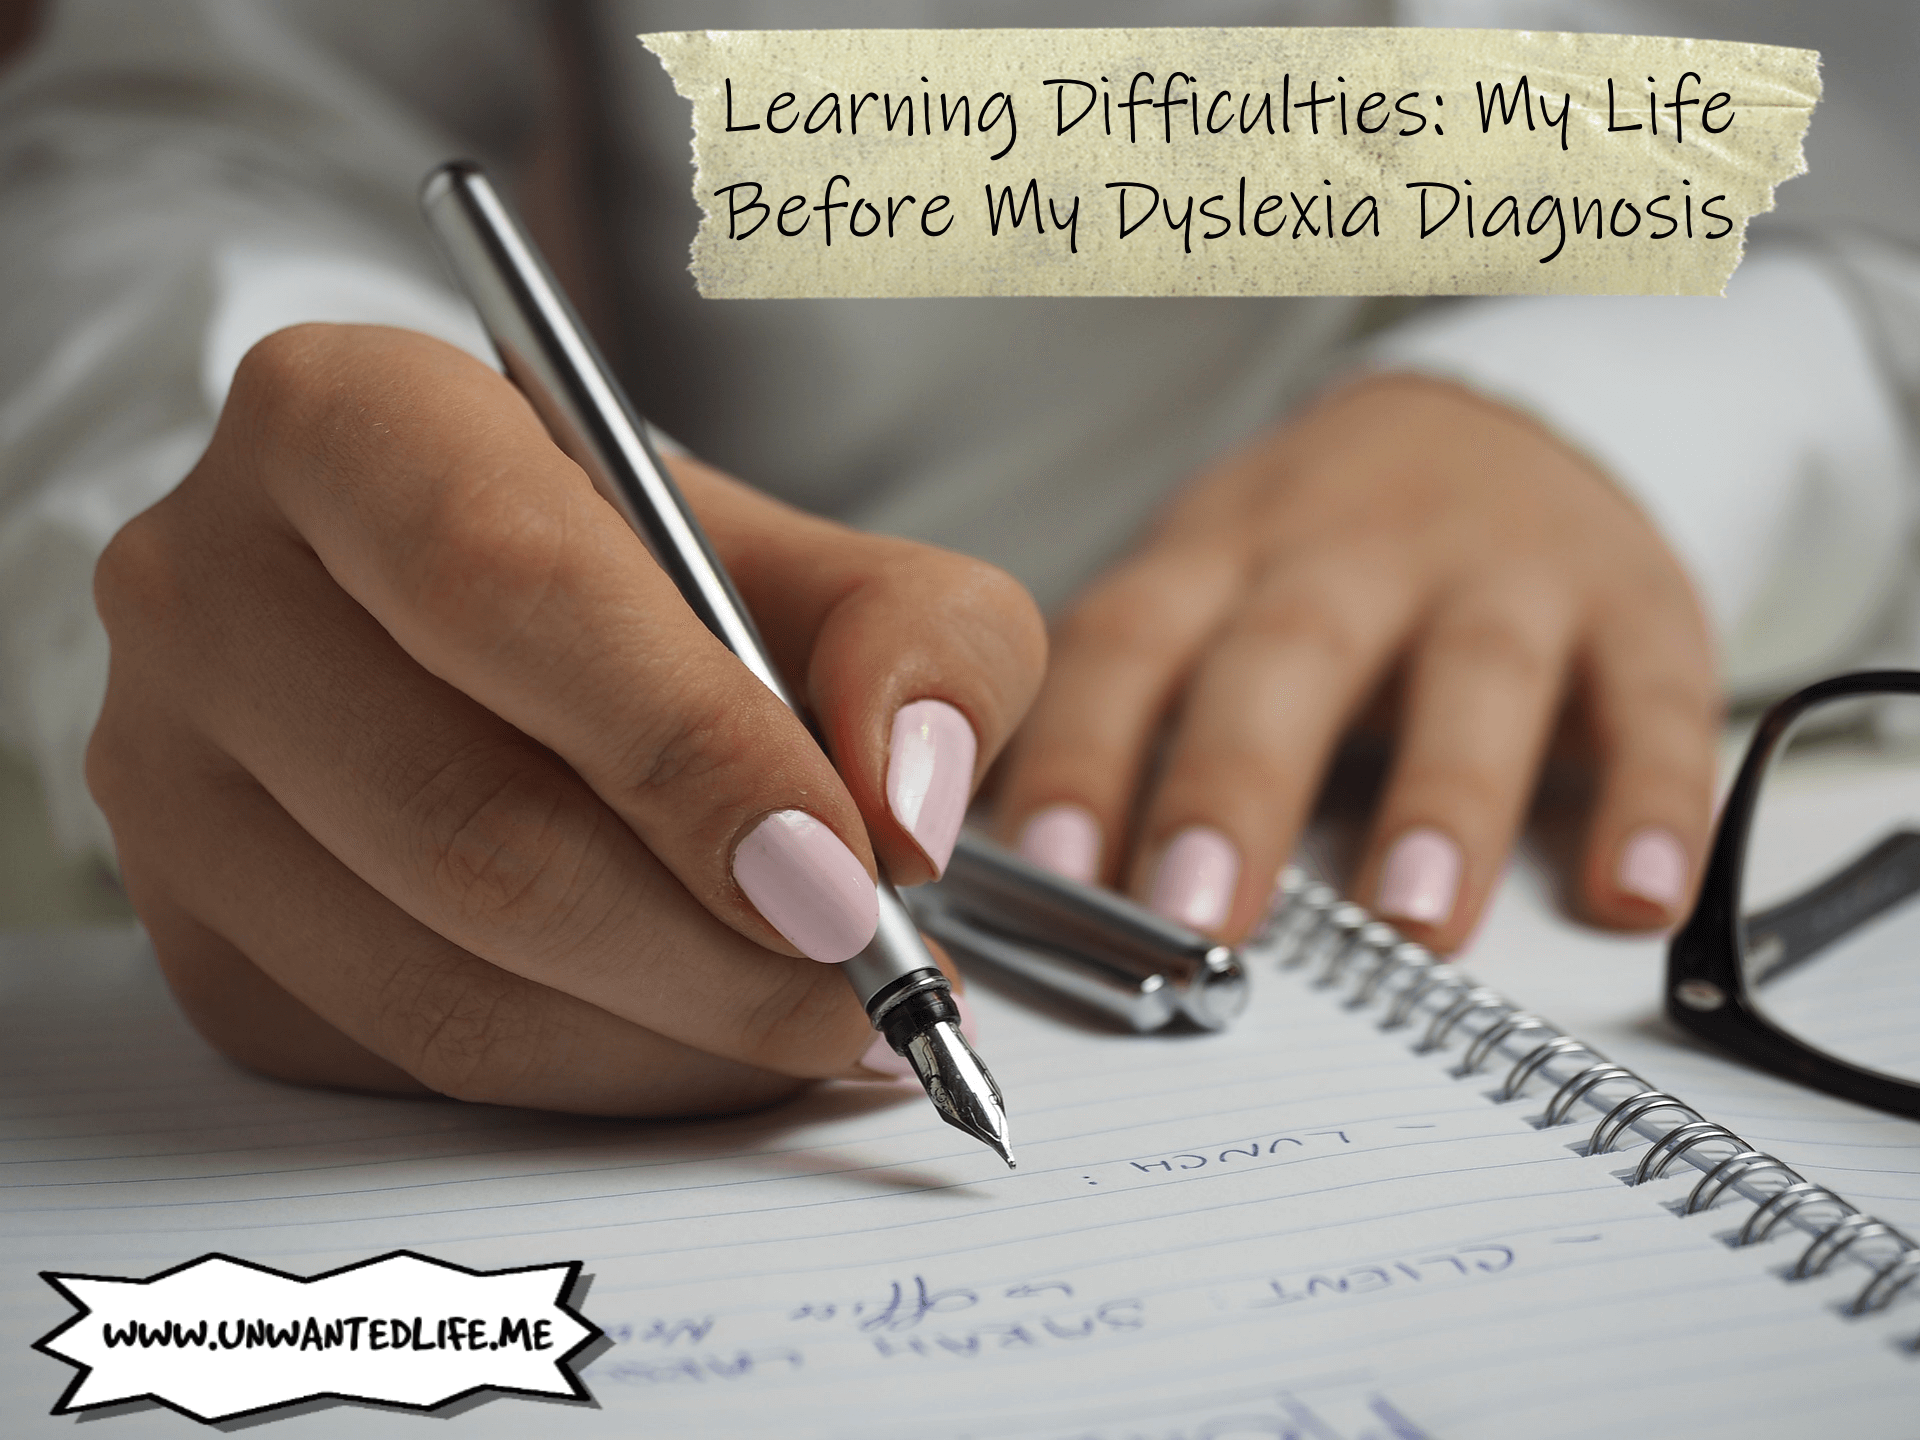 A pair of woman's hands writing in a notebook to represent the topic of the article - Learning Difficulties: My Life Before My Dyslexia Diagnosis